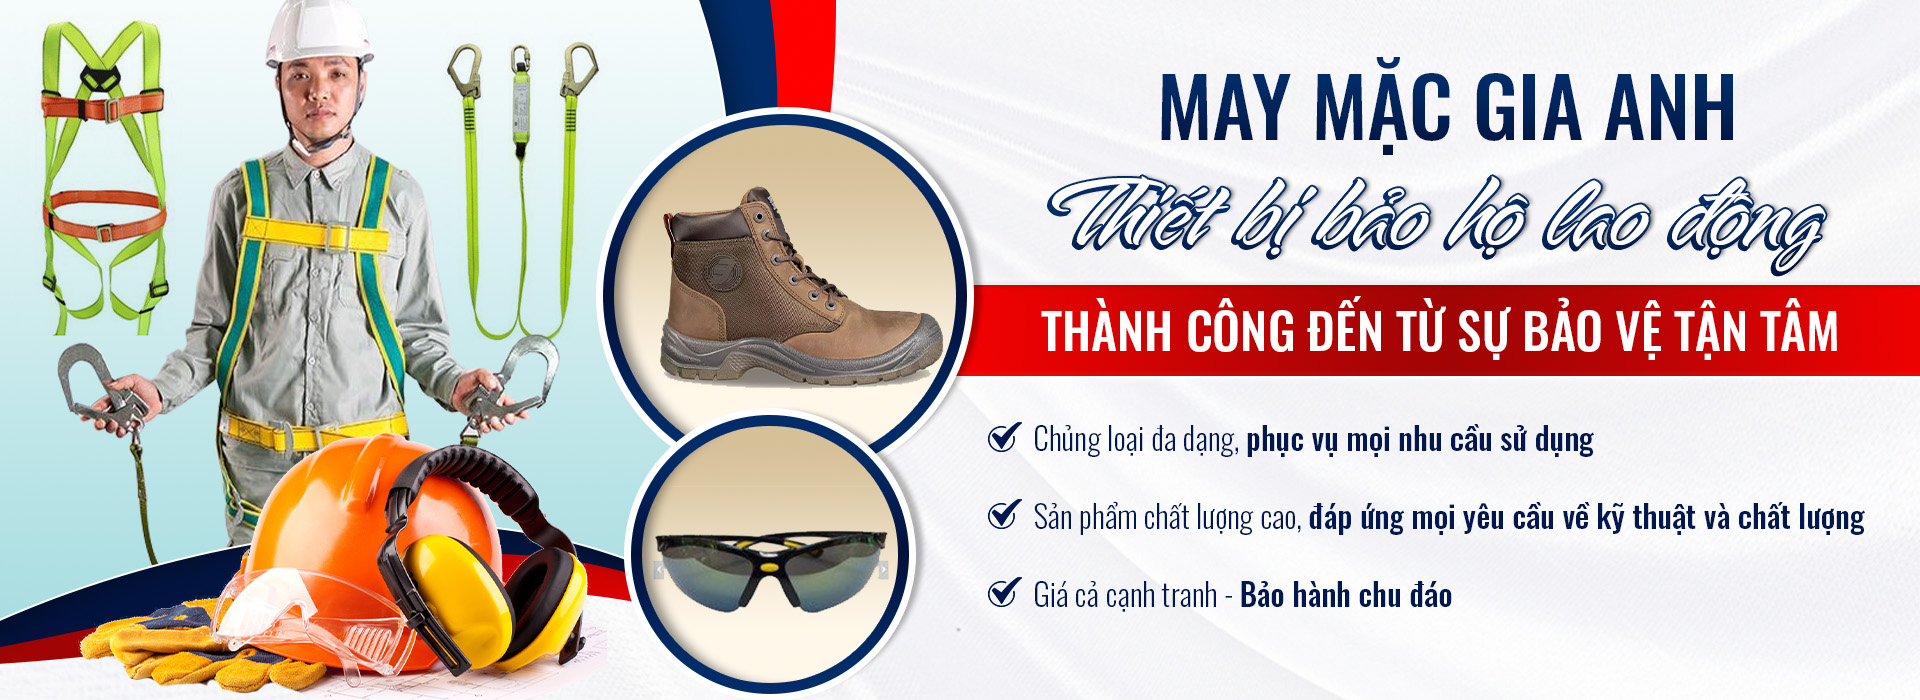 Công Ty TNHH May Mặc Gia Anh